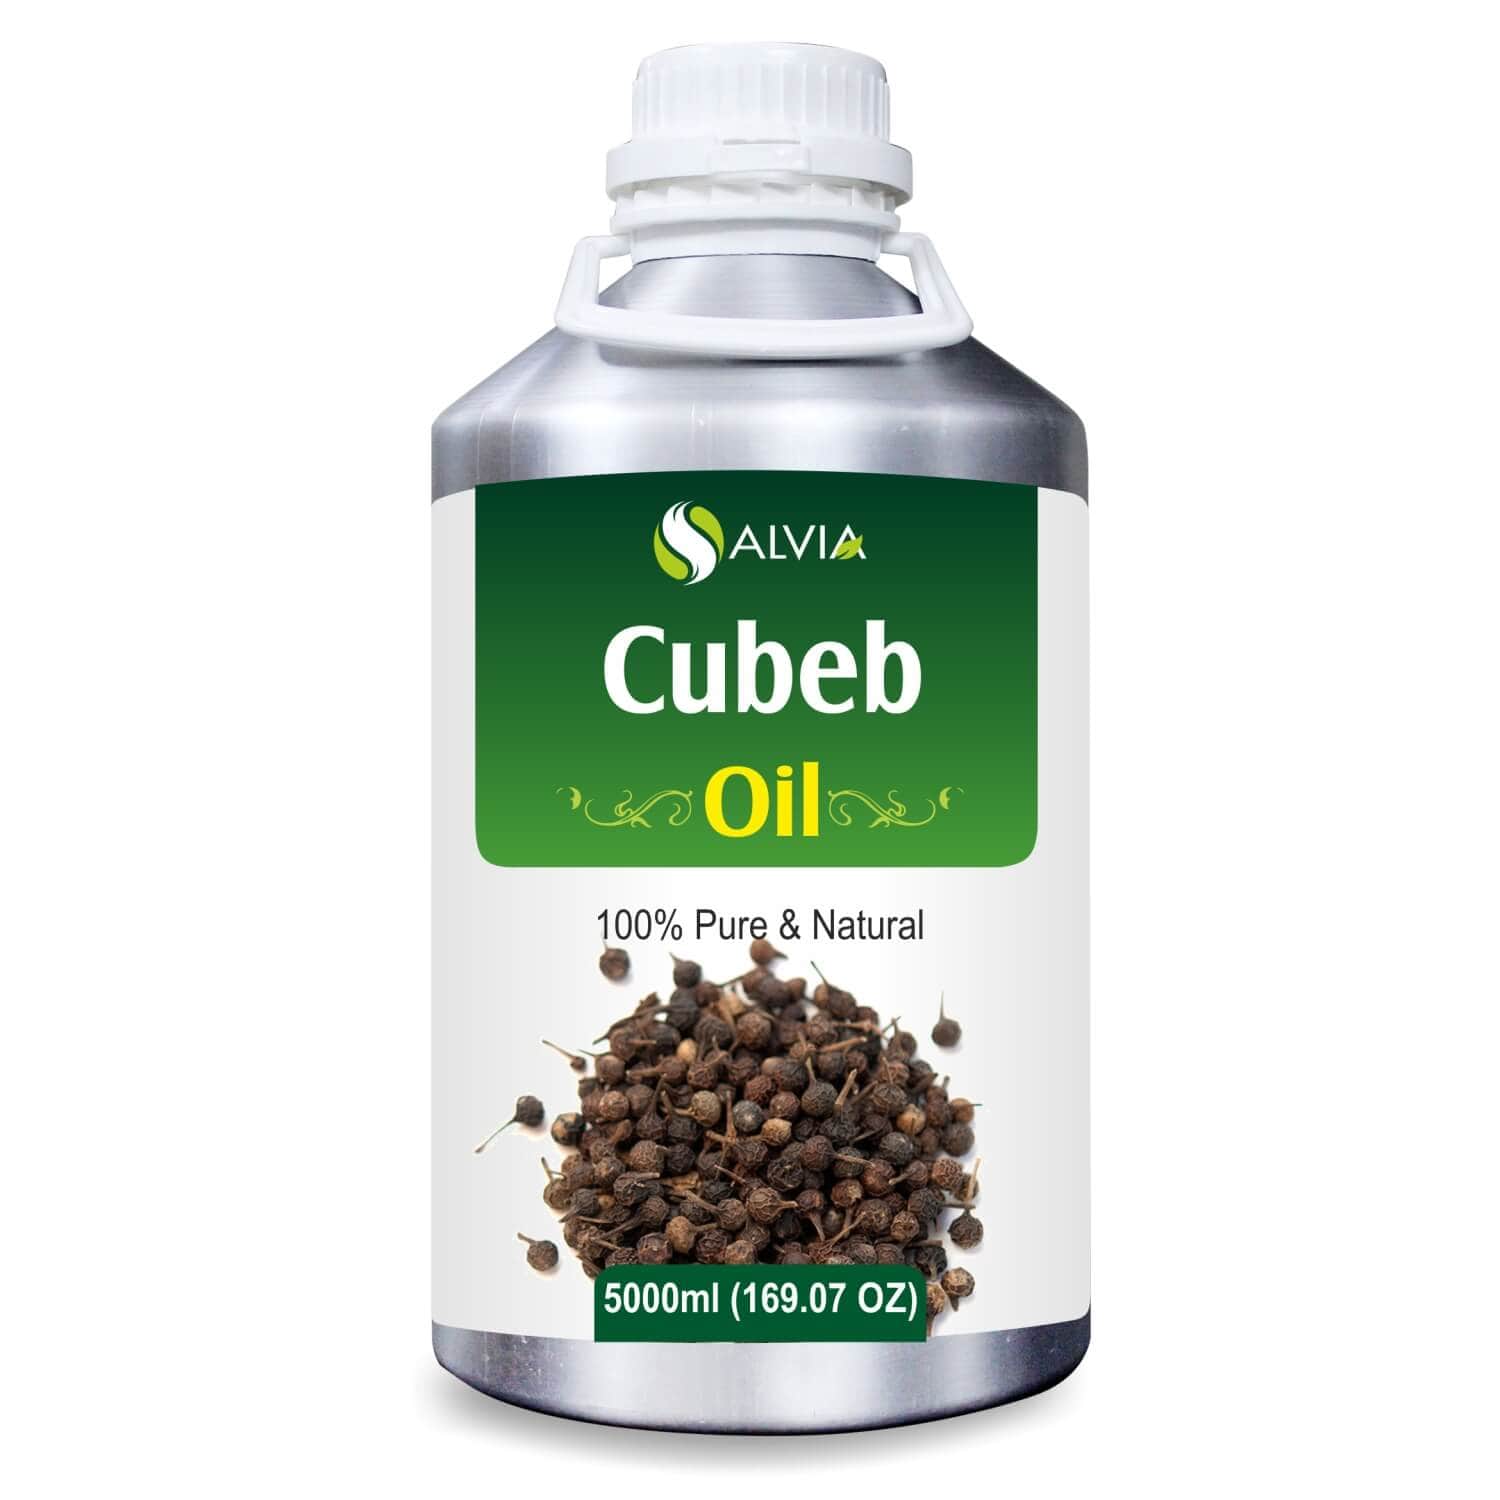 Salvia Natural Essential Oils 5000ml Cubeb Oil (Piper Cubeba) 100% Natural Pure Essential Oil For Relieves Congestion & Respiratory Illness, Manages Infertility, Reduces Bone Problems